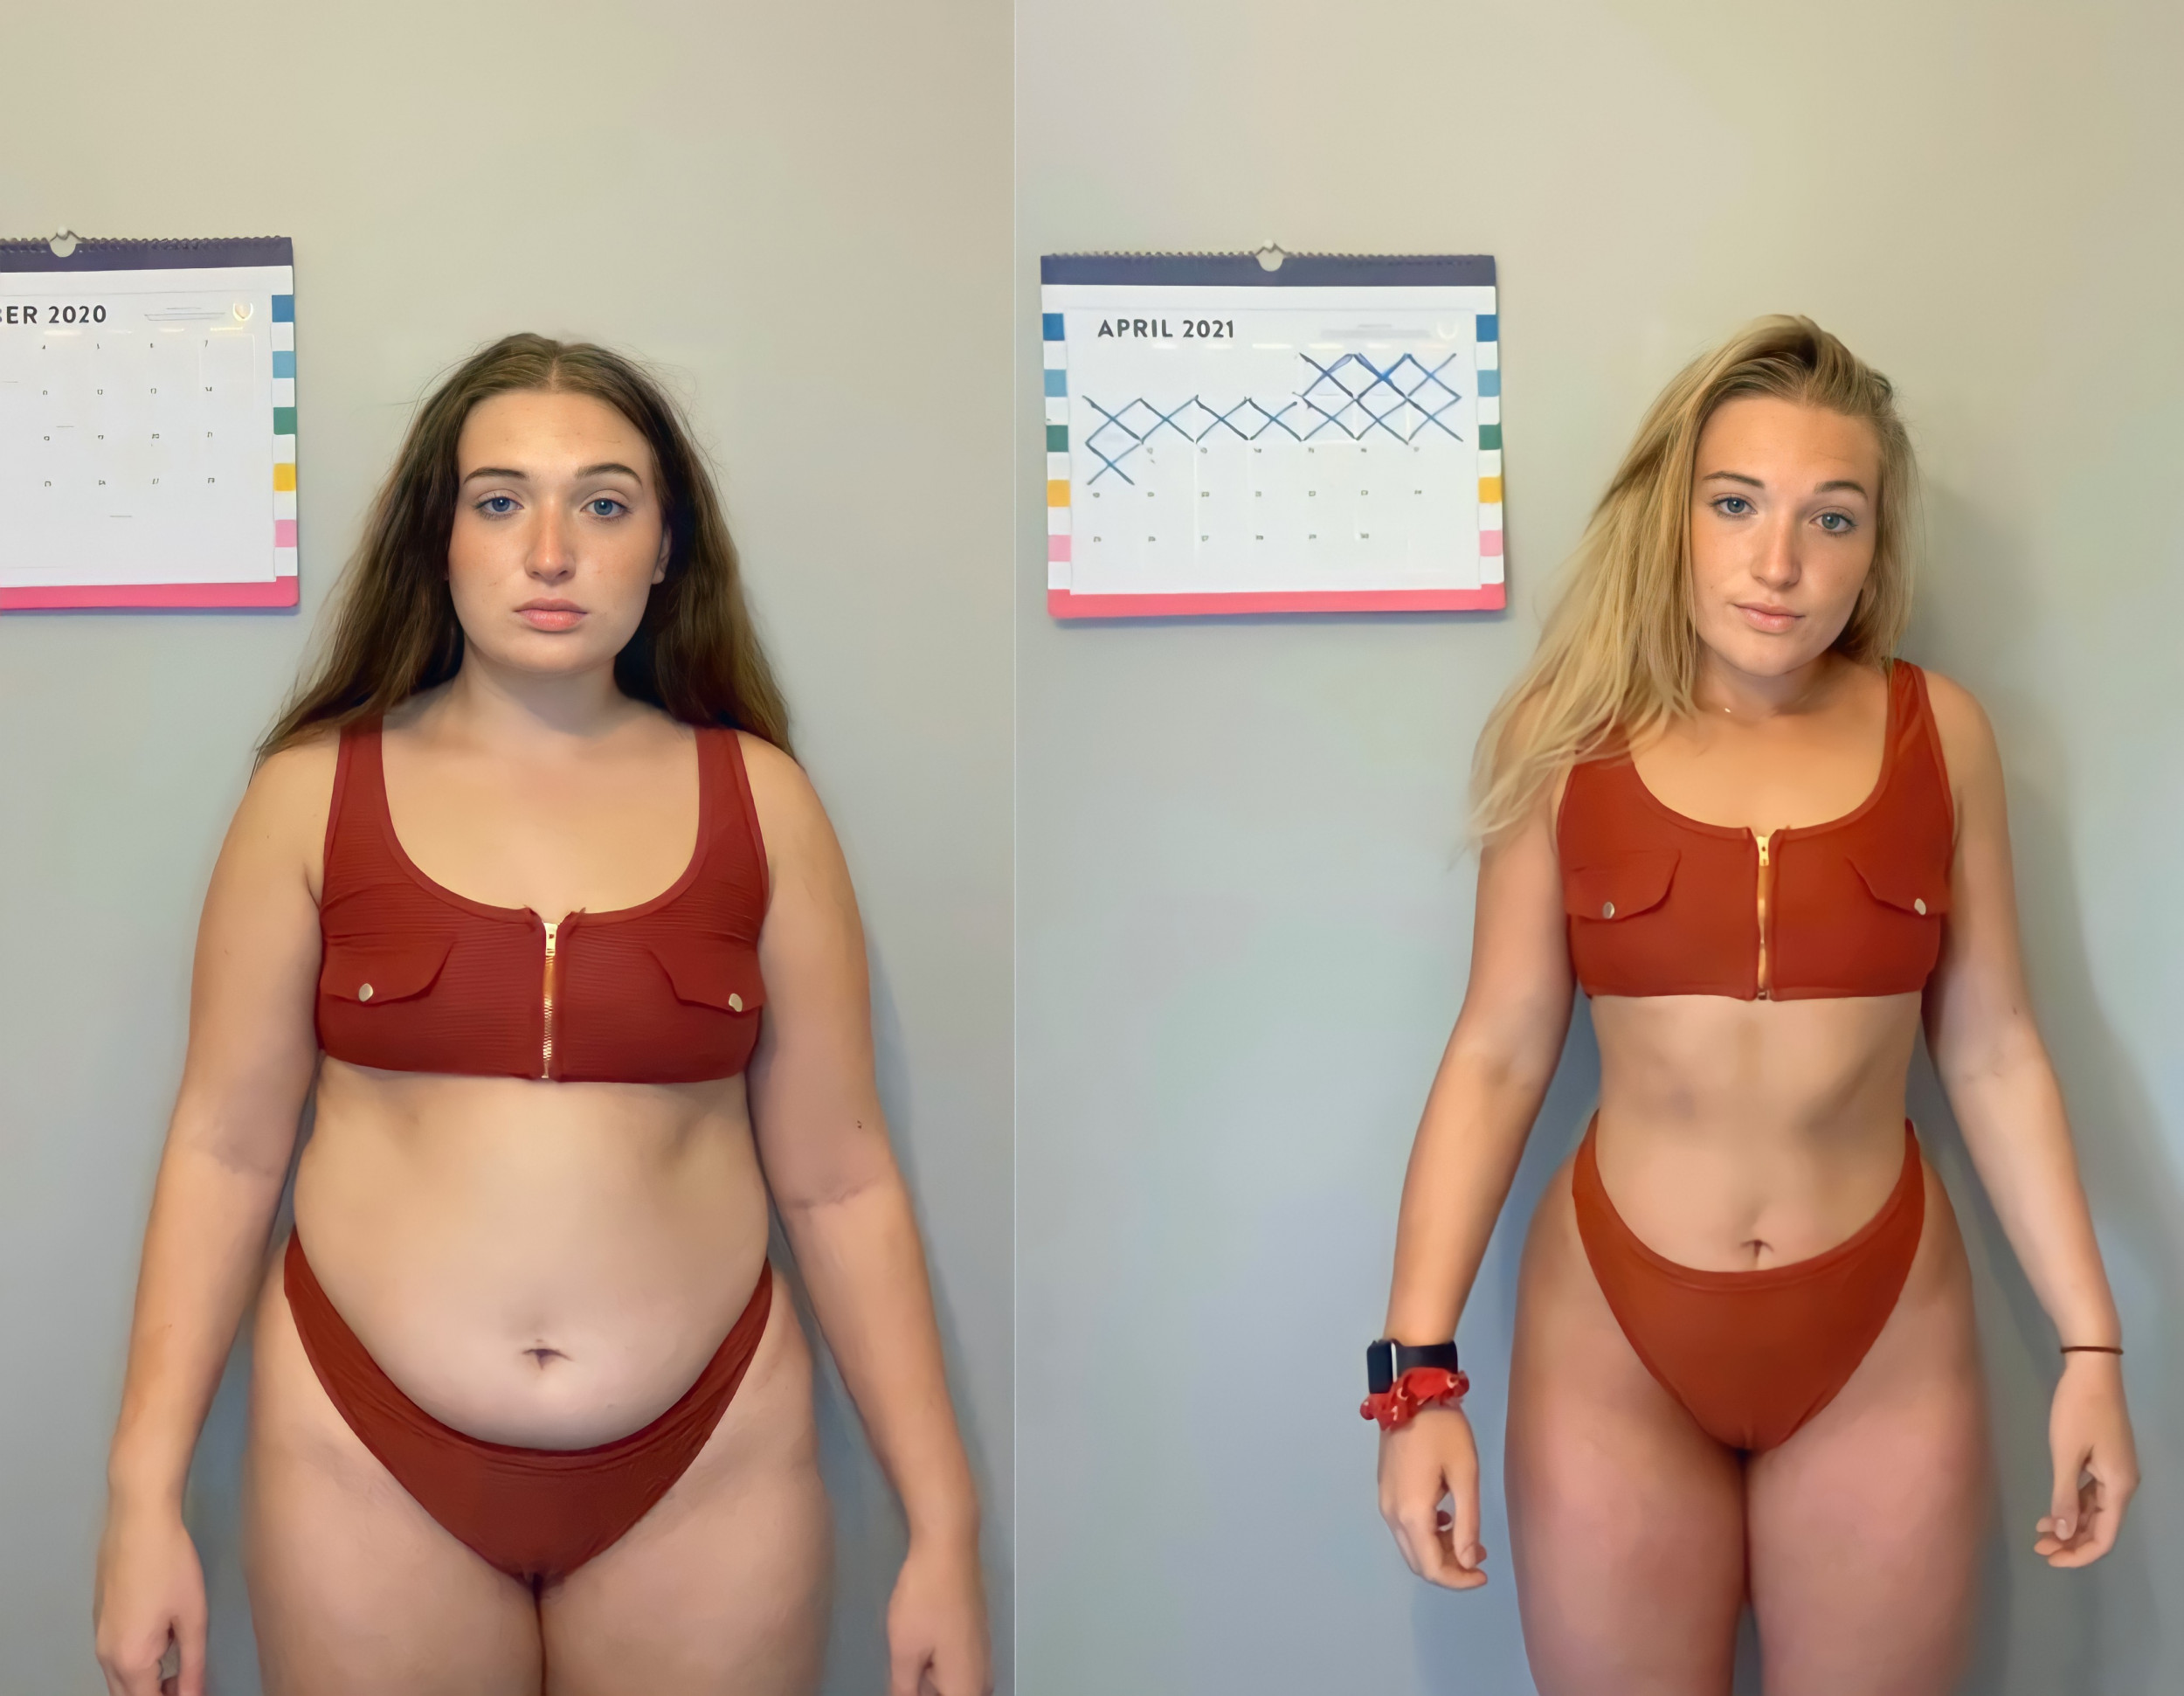 Before And After Weight Loss Women